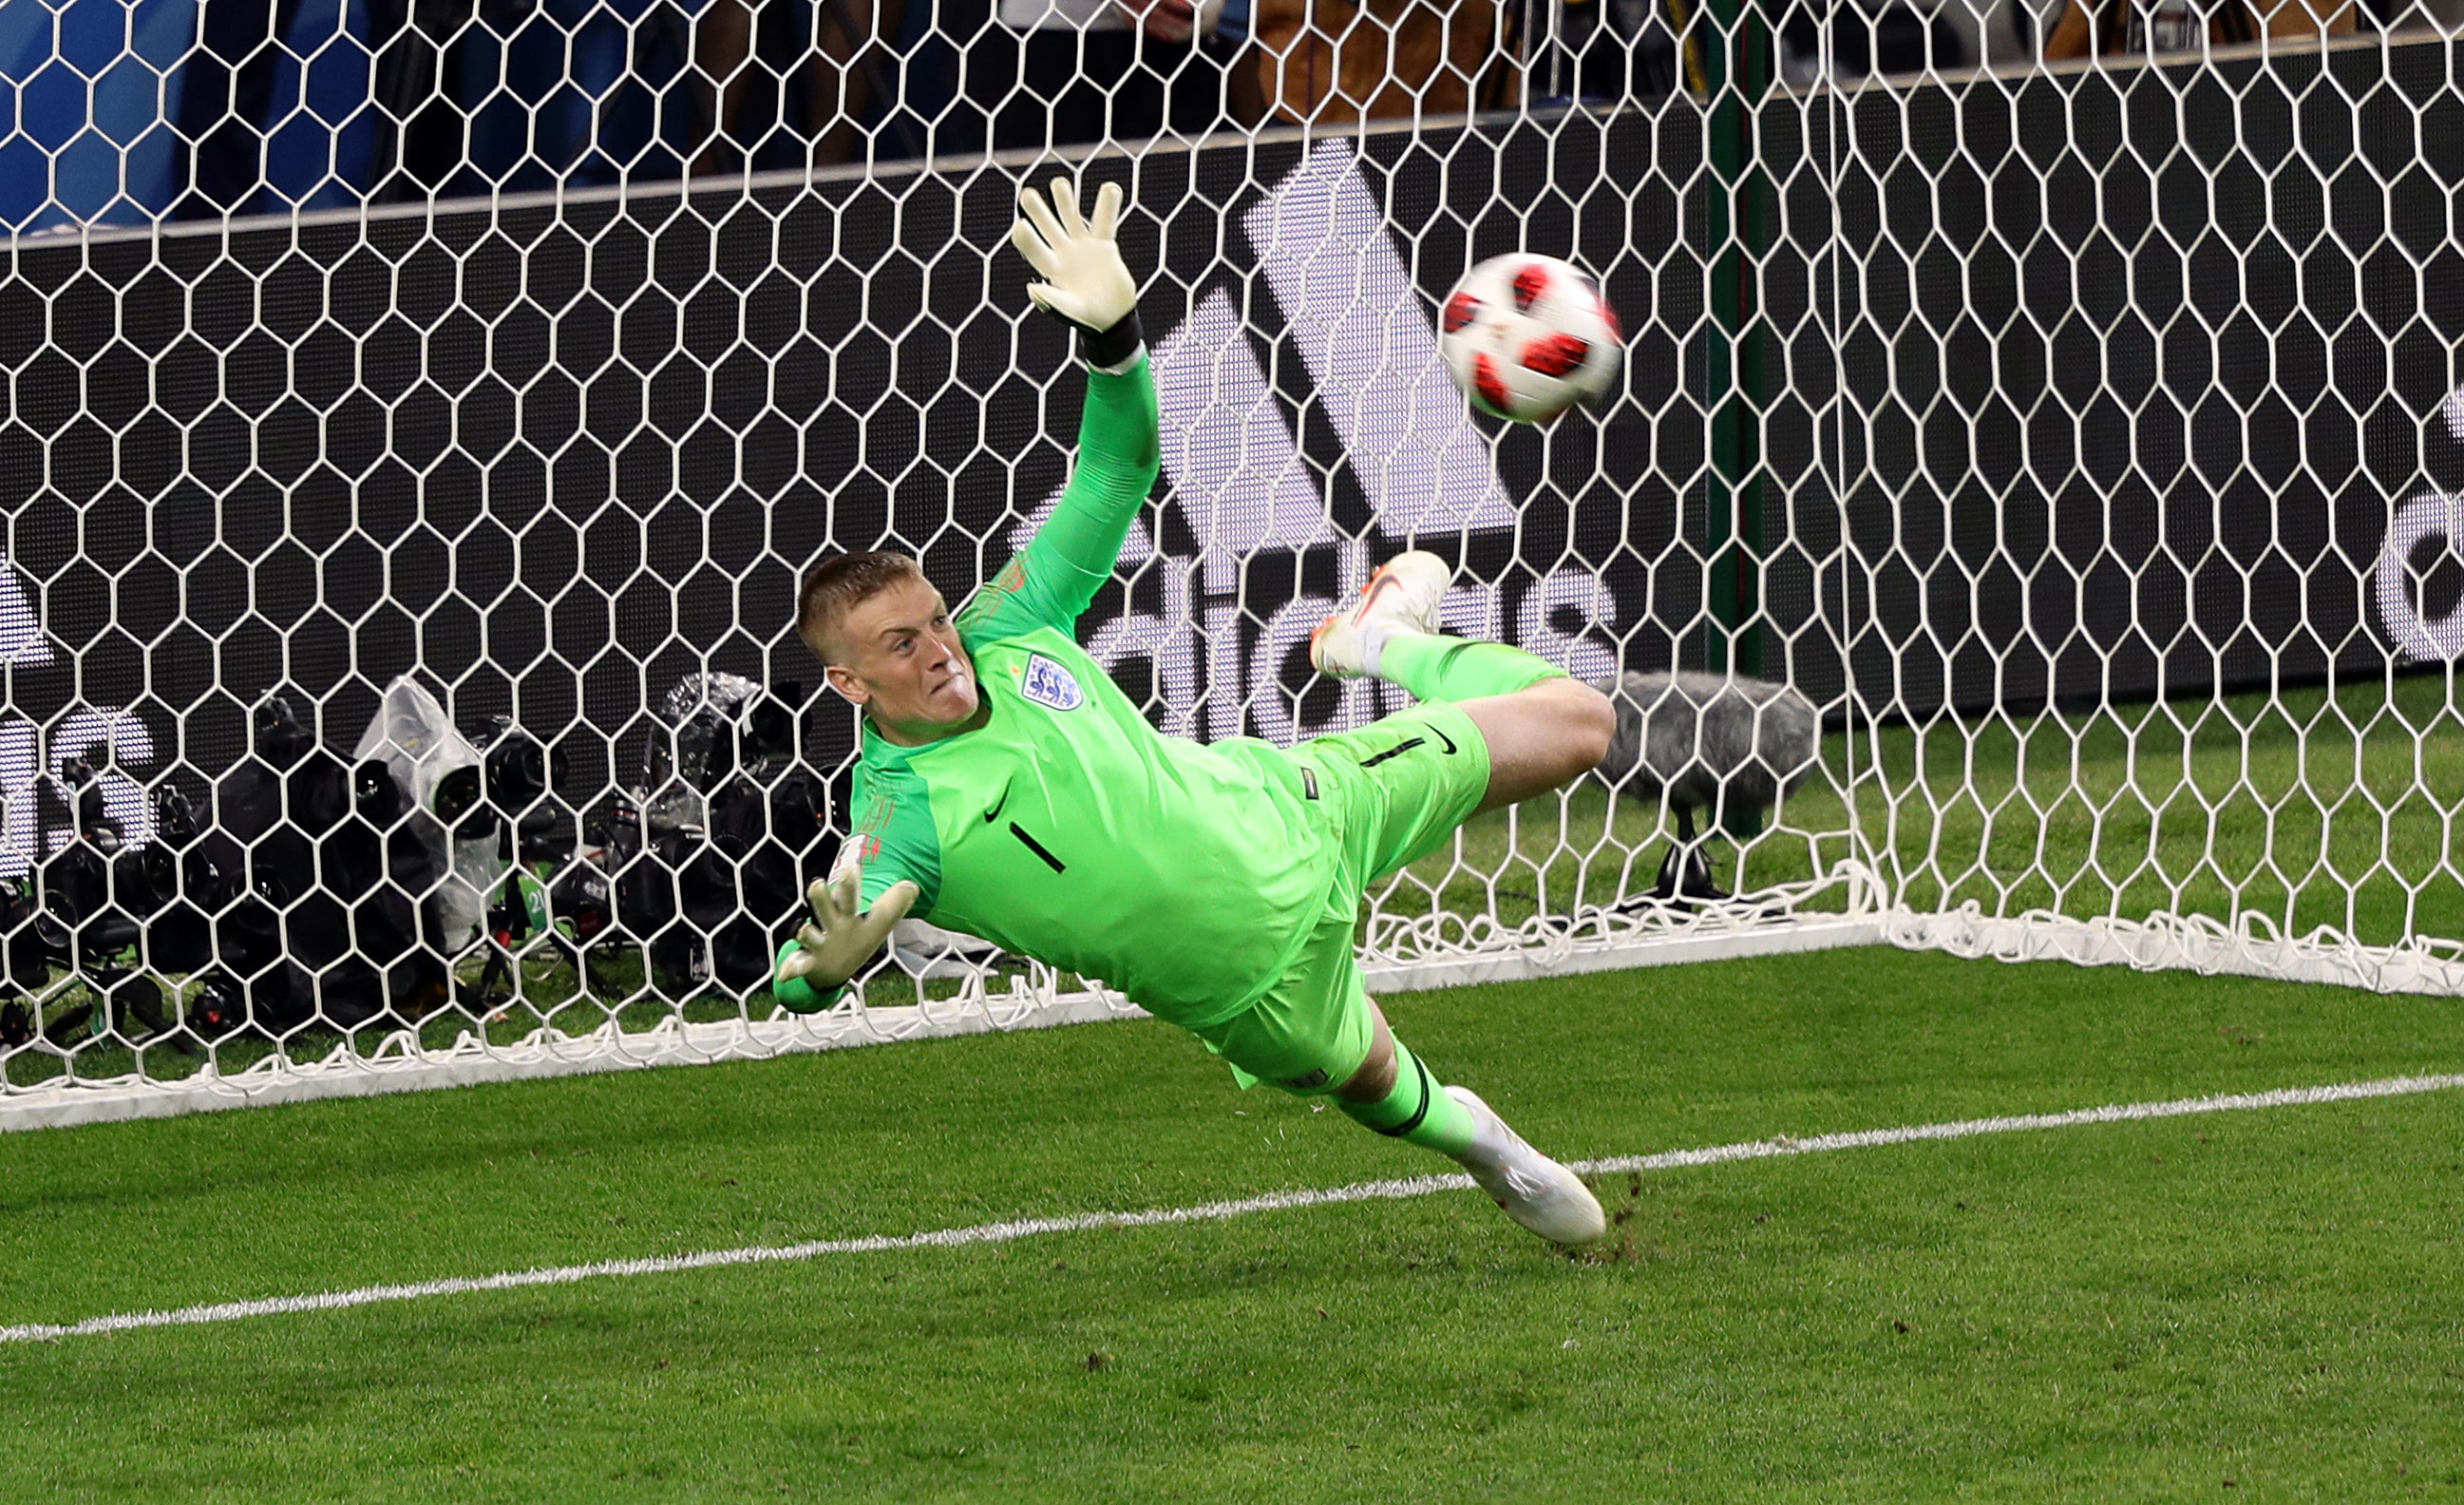 England goalkeeper Jordan Pickford saves a penalty from Colombia’s Carlos Bacca during the FIFA World Cup 2018, round of 16 match. (Aaron Chown/PA)